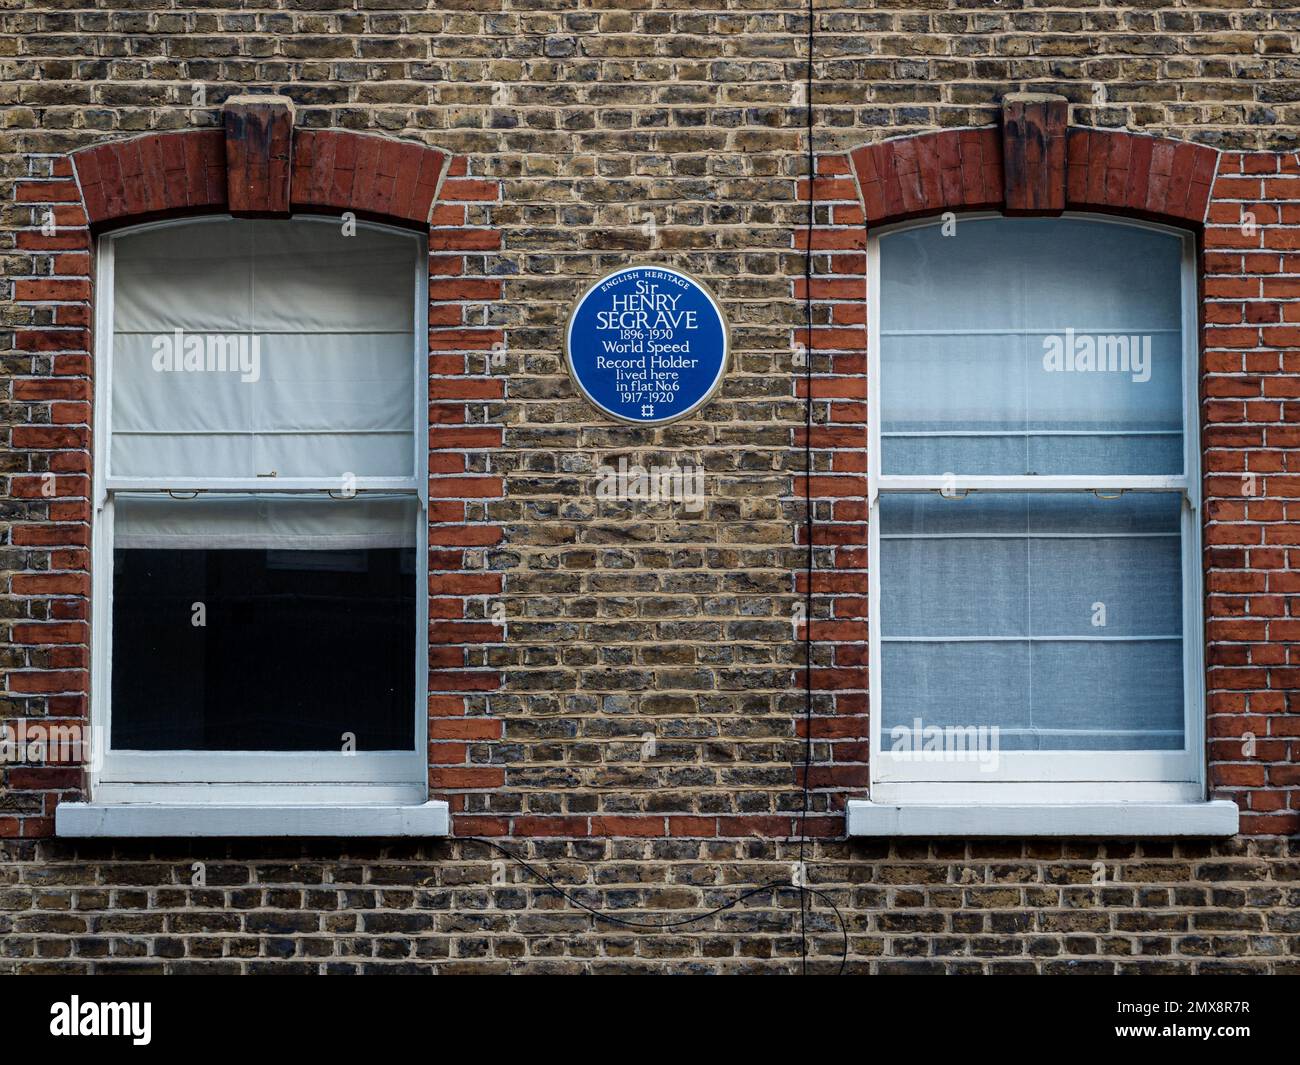 Sir Henry Segrave Blue Plaque Dorset St London. Inscription Sir HENRY SEGRAVE 1896-1930 World Speed Record Holder lived here in flat No.6 1917-1920. Stock Photo